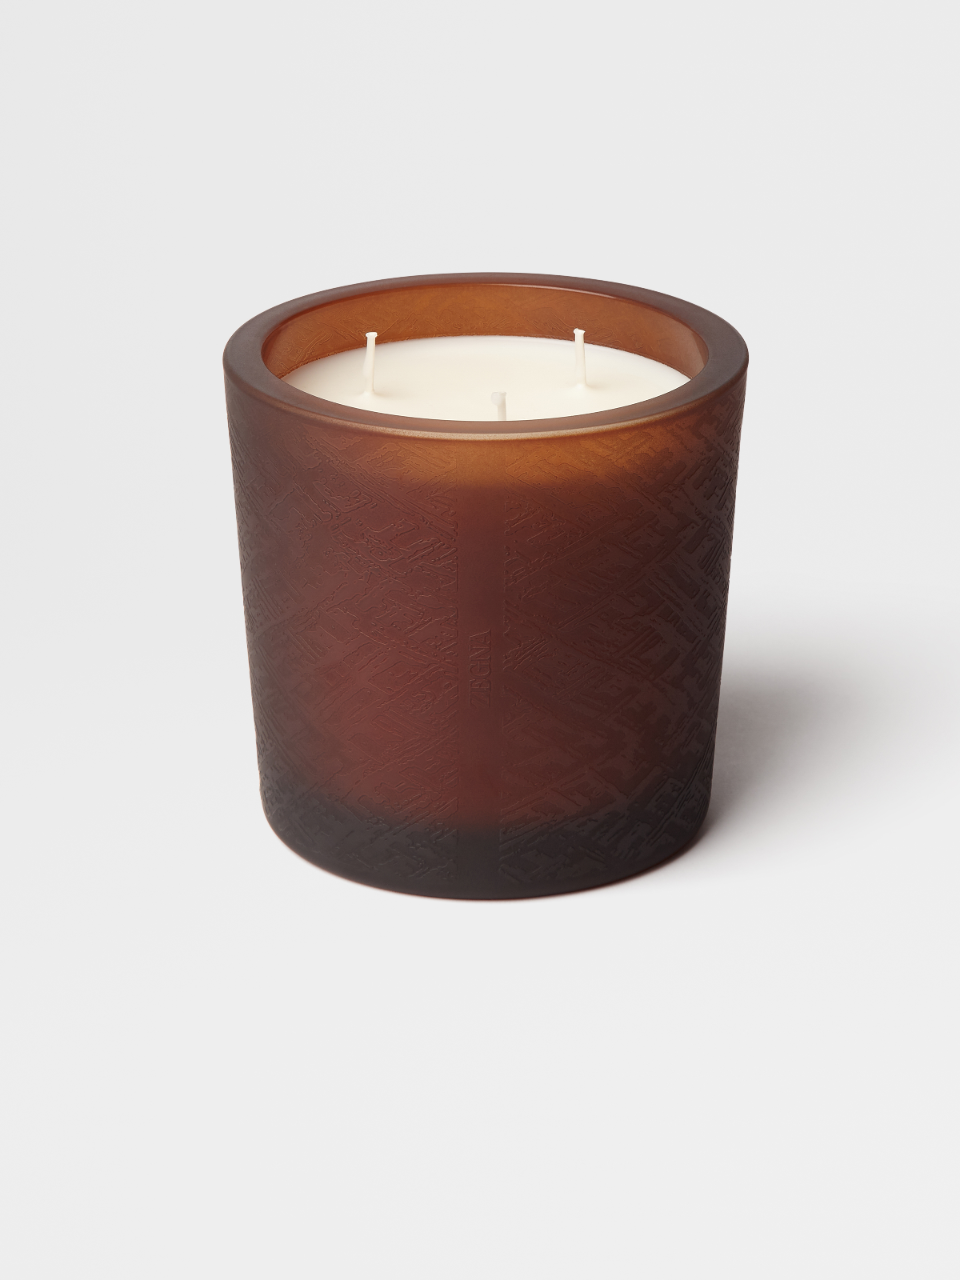 Zegna Cashmere 3-wick Candle